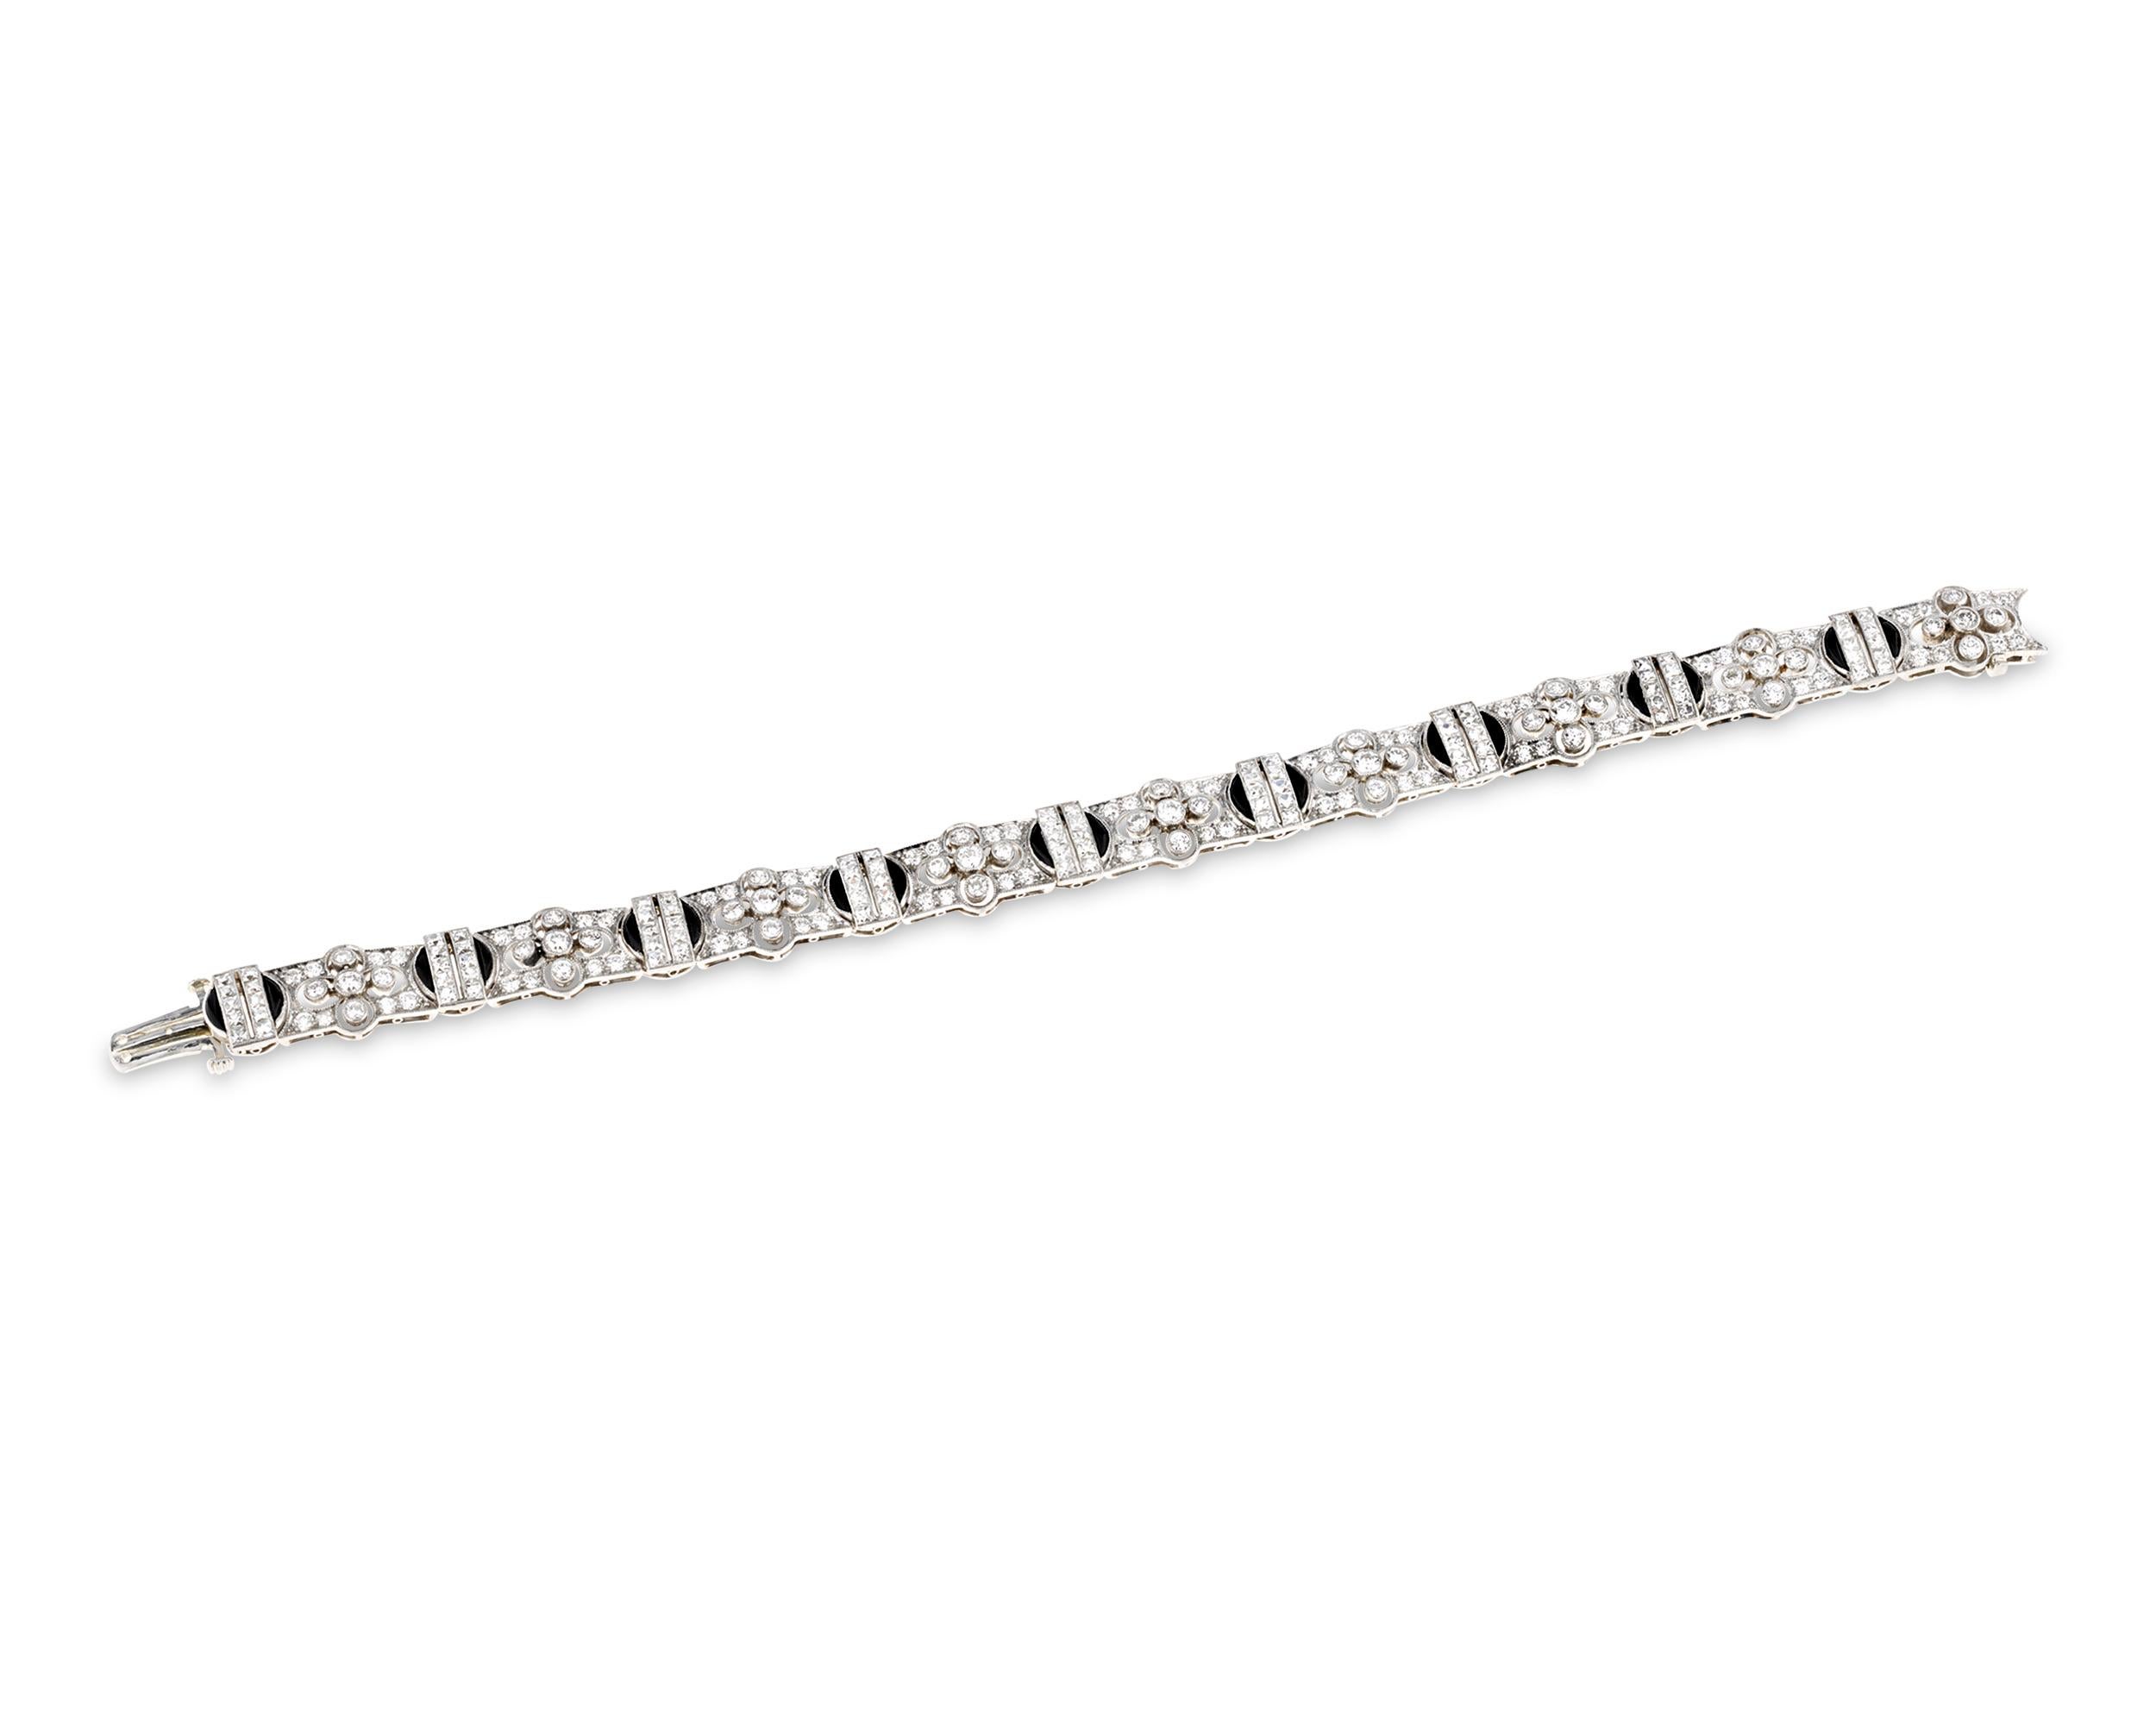 The American firm most synonymous with luxury, this Tiffany & Co. diamond and onyx bracelet perfectly illustrates why this firm is so beloved. Crafted in a sophisticated, streamlined Art Deco design, this bracelet sparkles with 6.33 total carats of